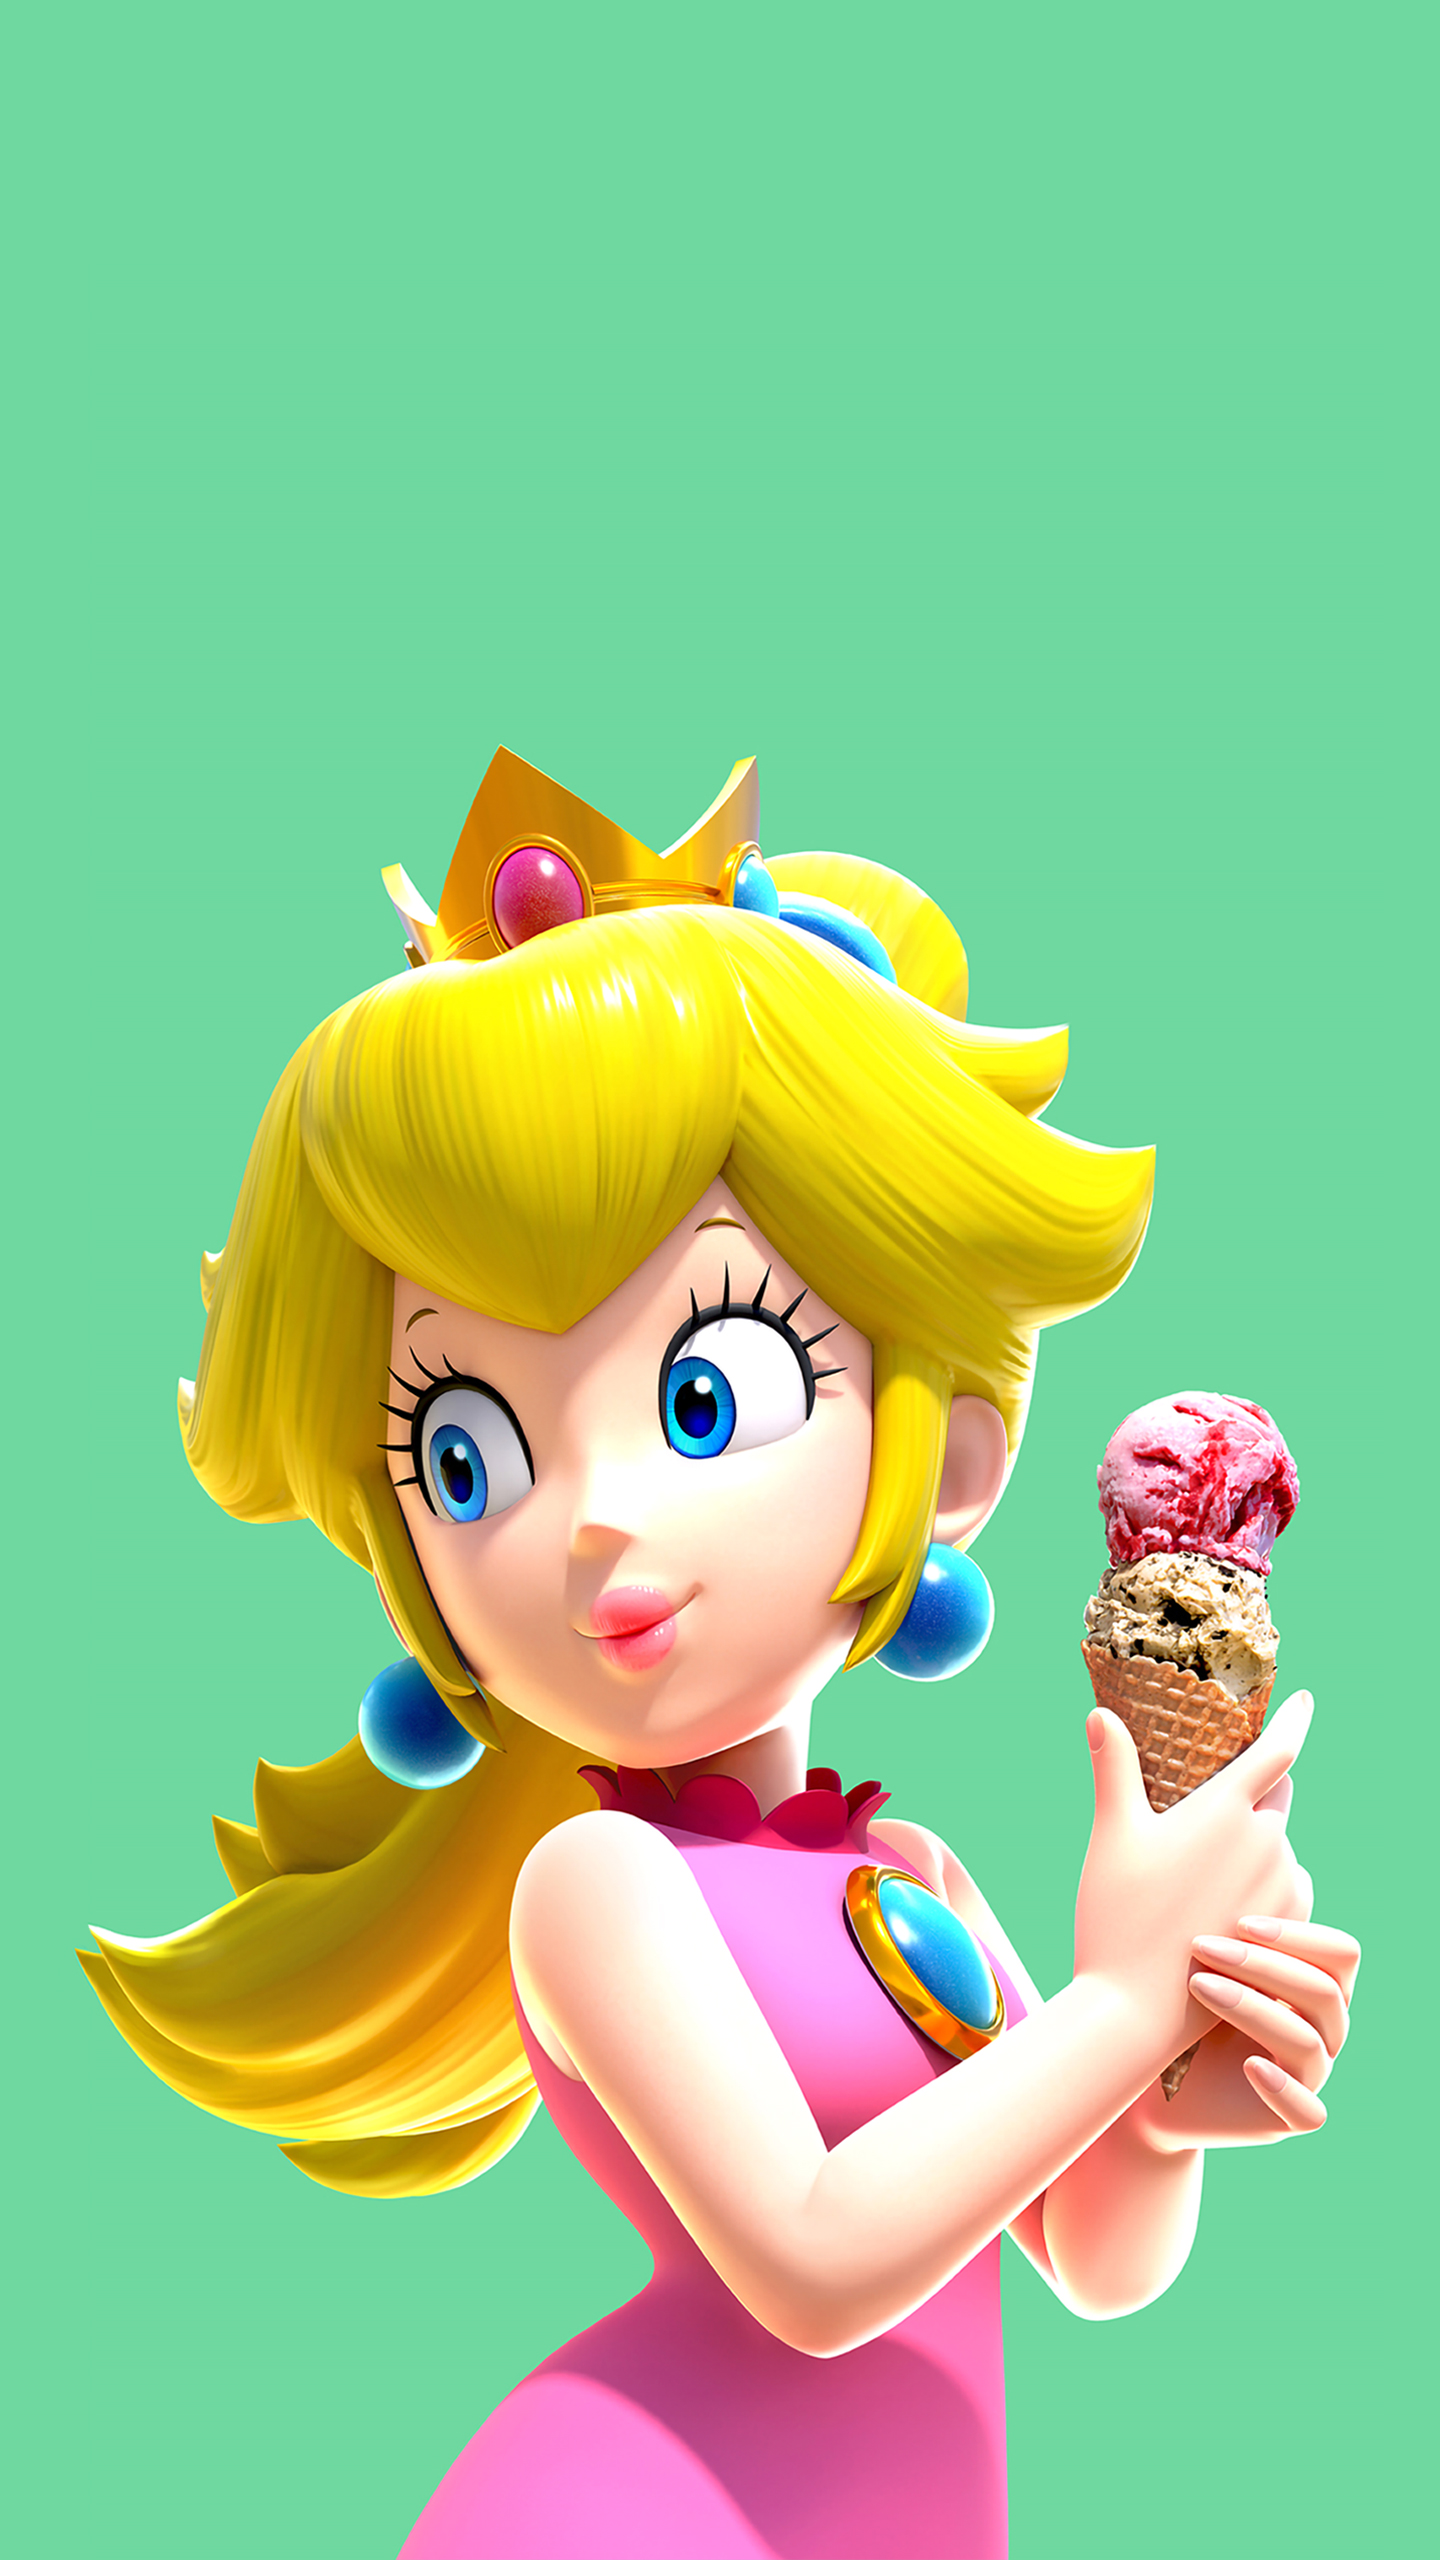 Iphone Peach Wallpapers